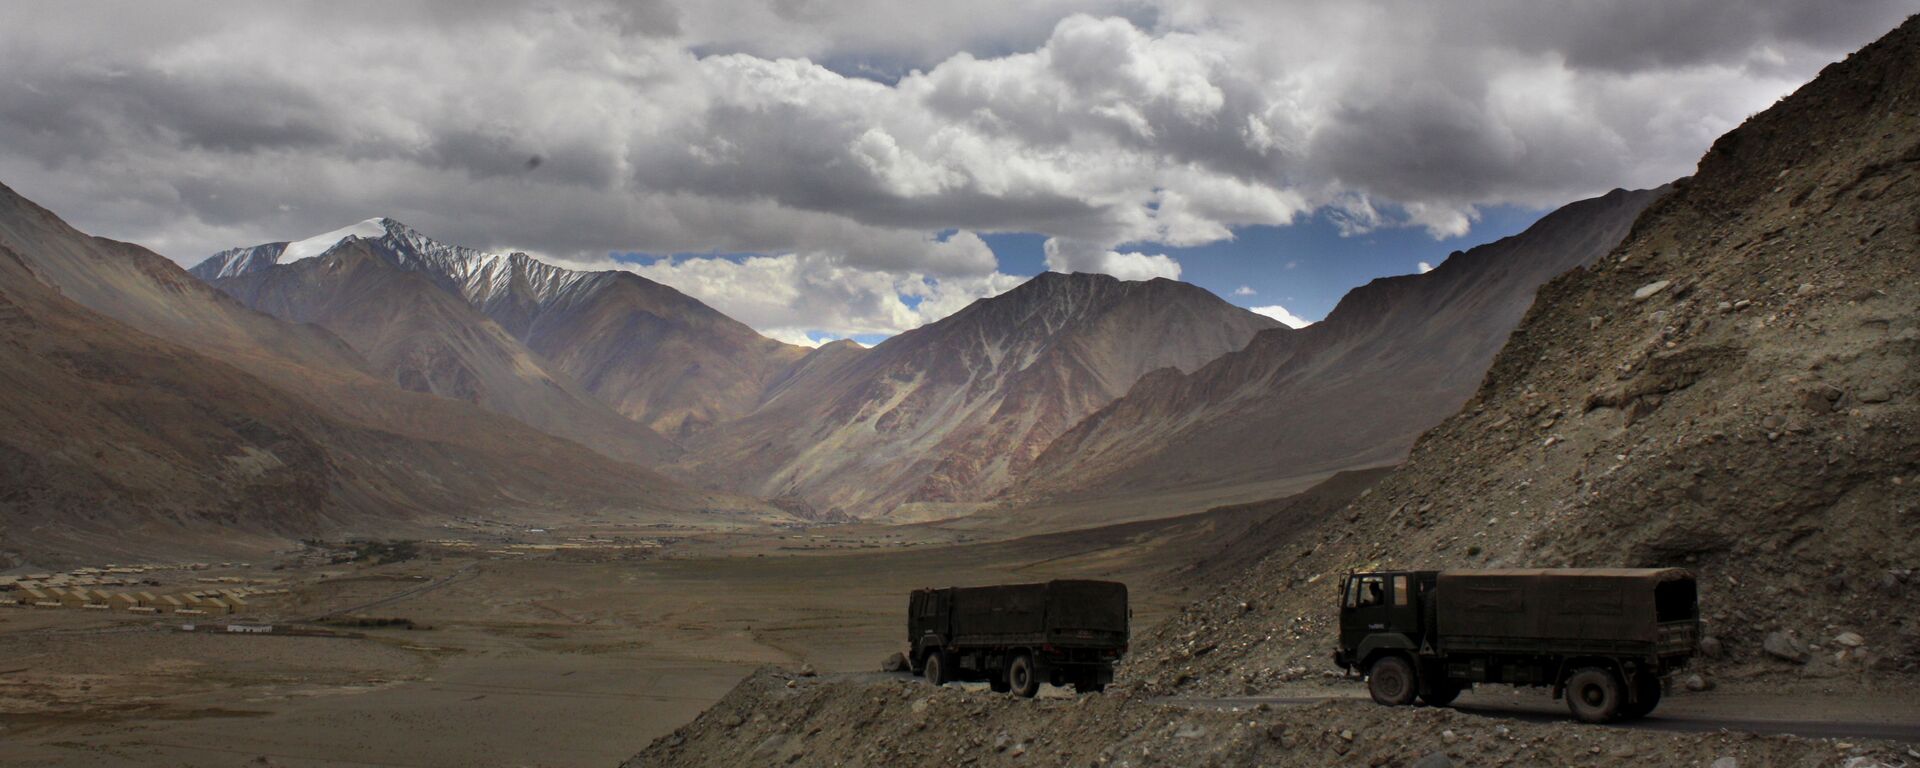 FILE- In this Sept. 14, 2017, file photo, Indian army trucks drive near Pangong Tso lake near the India China border in India's Ladakh area. The Indian army said Saturday, Jan. 9, 2020, that it has apprehended a Chinese soldier in the remote Ladakh region, where the two countries are locked in a monthslong military standoff along their disputed mountain border. An army statement said the Chinese soldier was taken into custody on Friday for transgressing into the Indian side in area South of Pangong Tso lake. (AP Photo/Manish Swarup) - Sputnik International, 1920, 29.06.2021